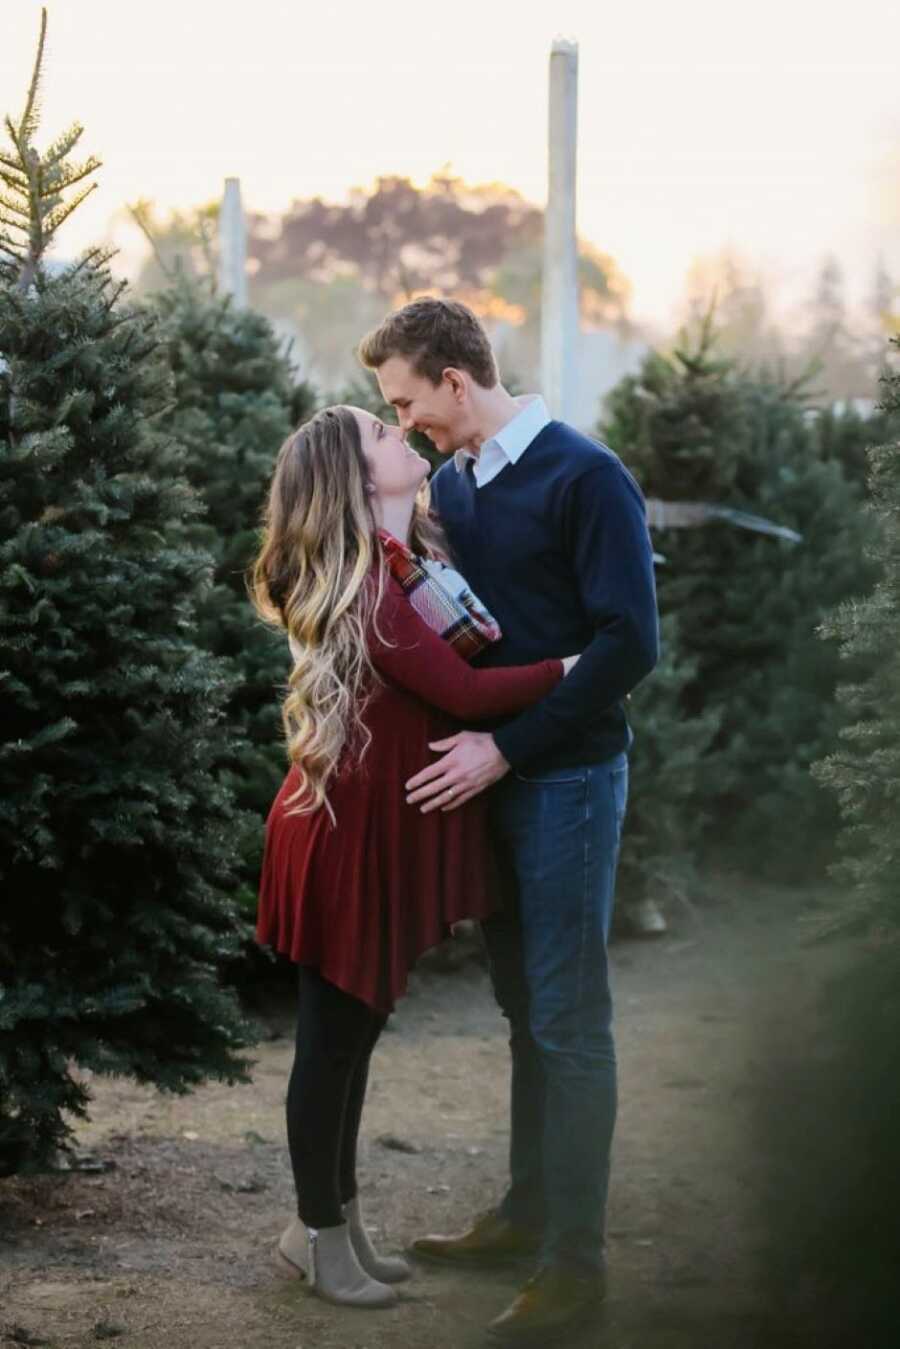 Husband and wife take Christmas-themed maternity photos together to celebrate their first daughter together